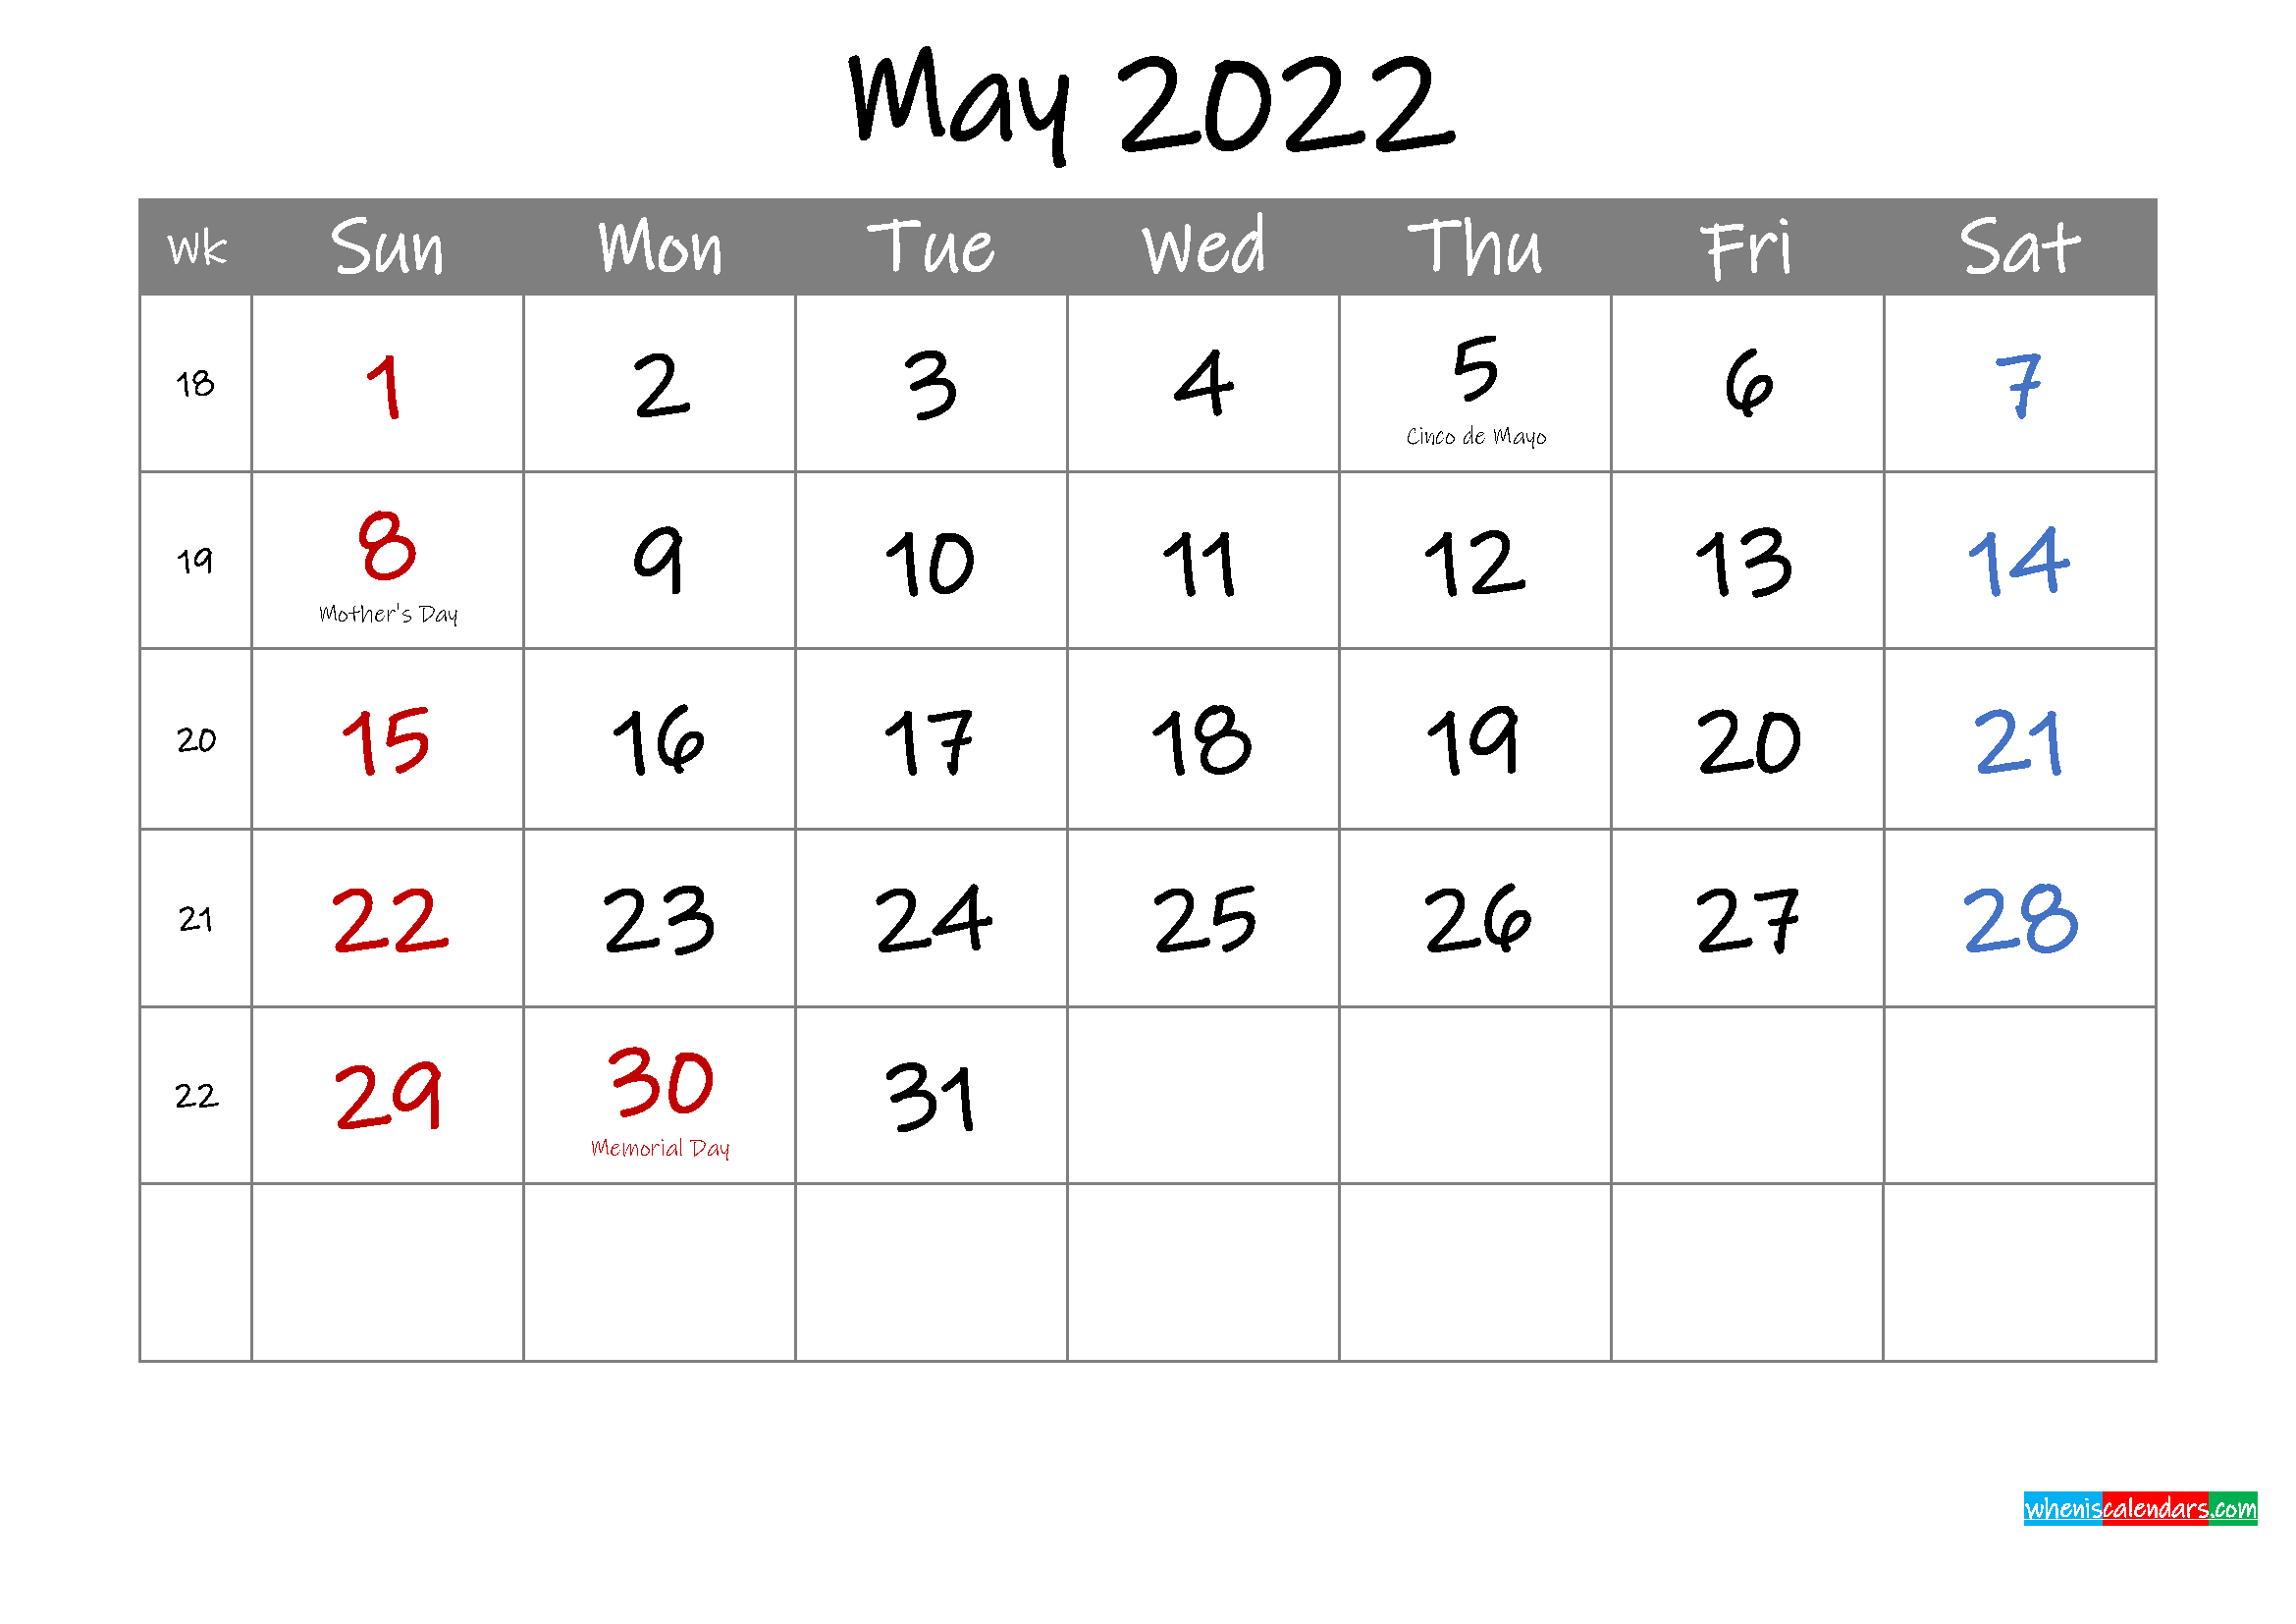 Editable May 2022 Calendar With Holidays - Template Ink22m5